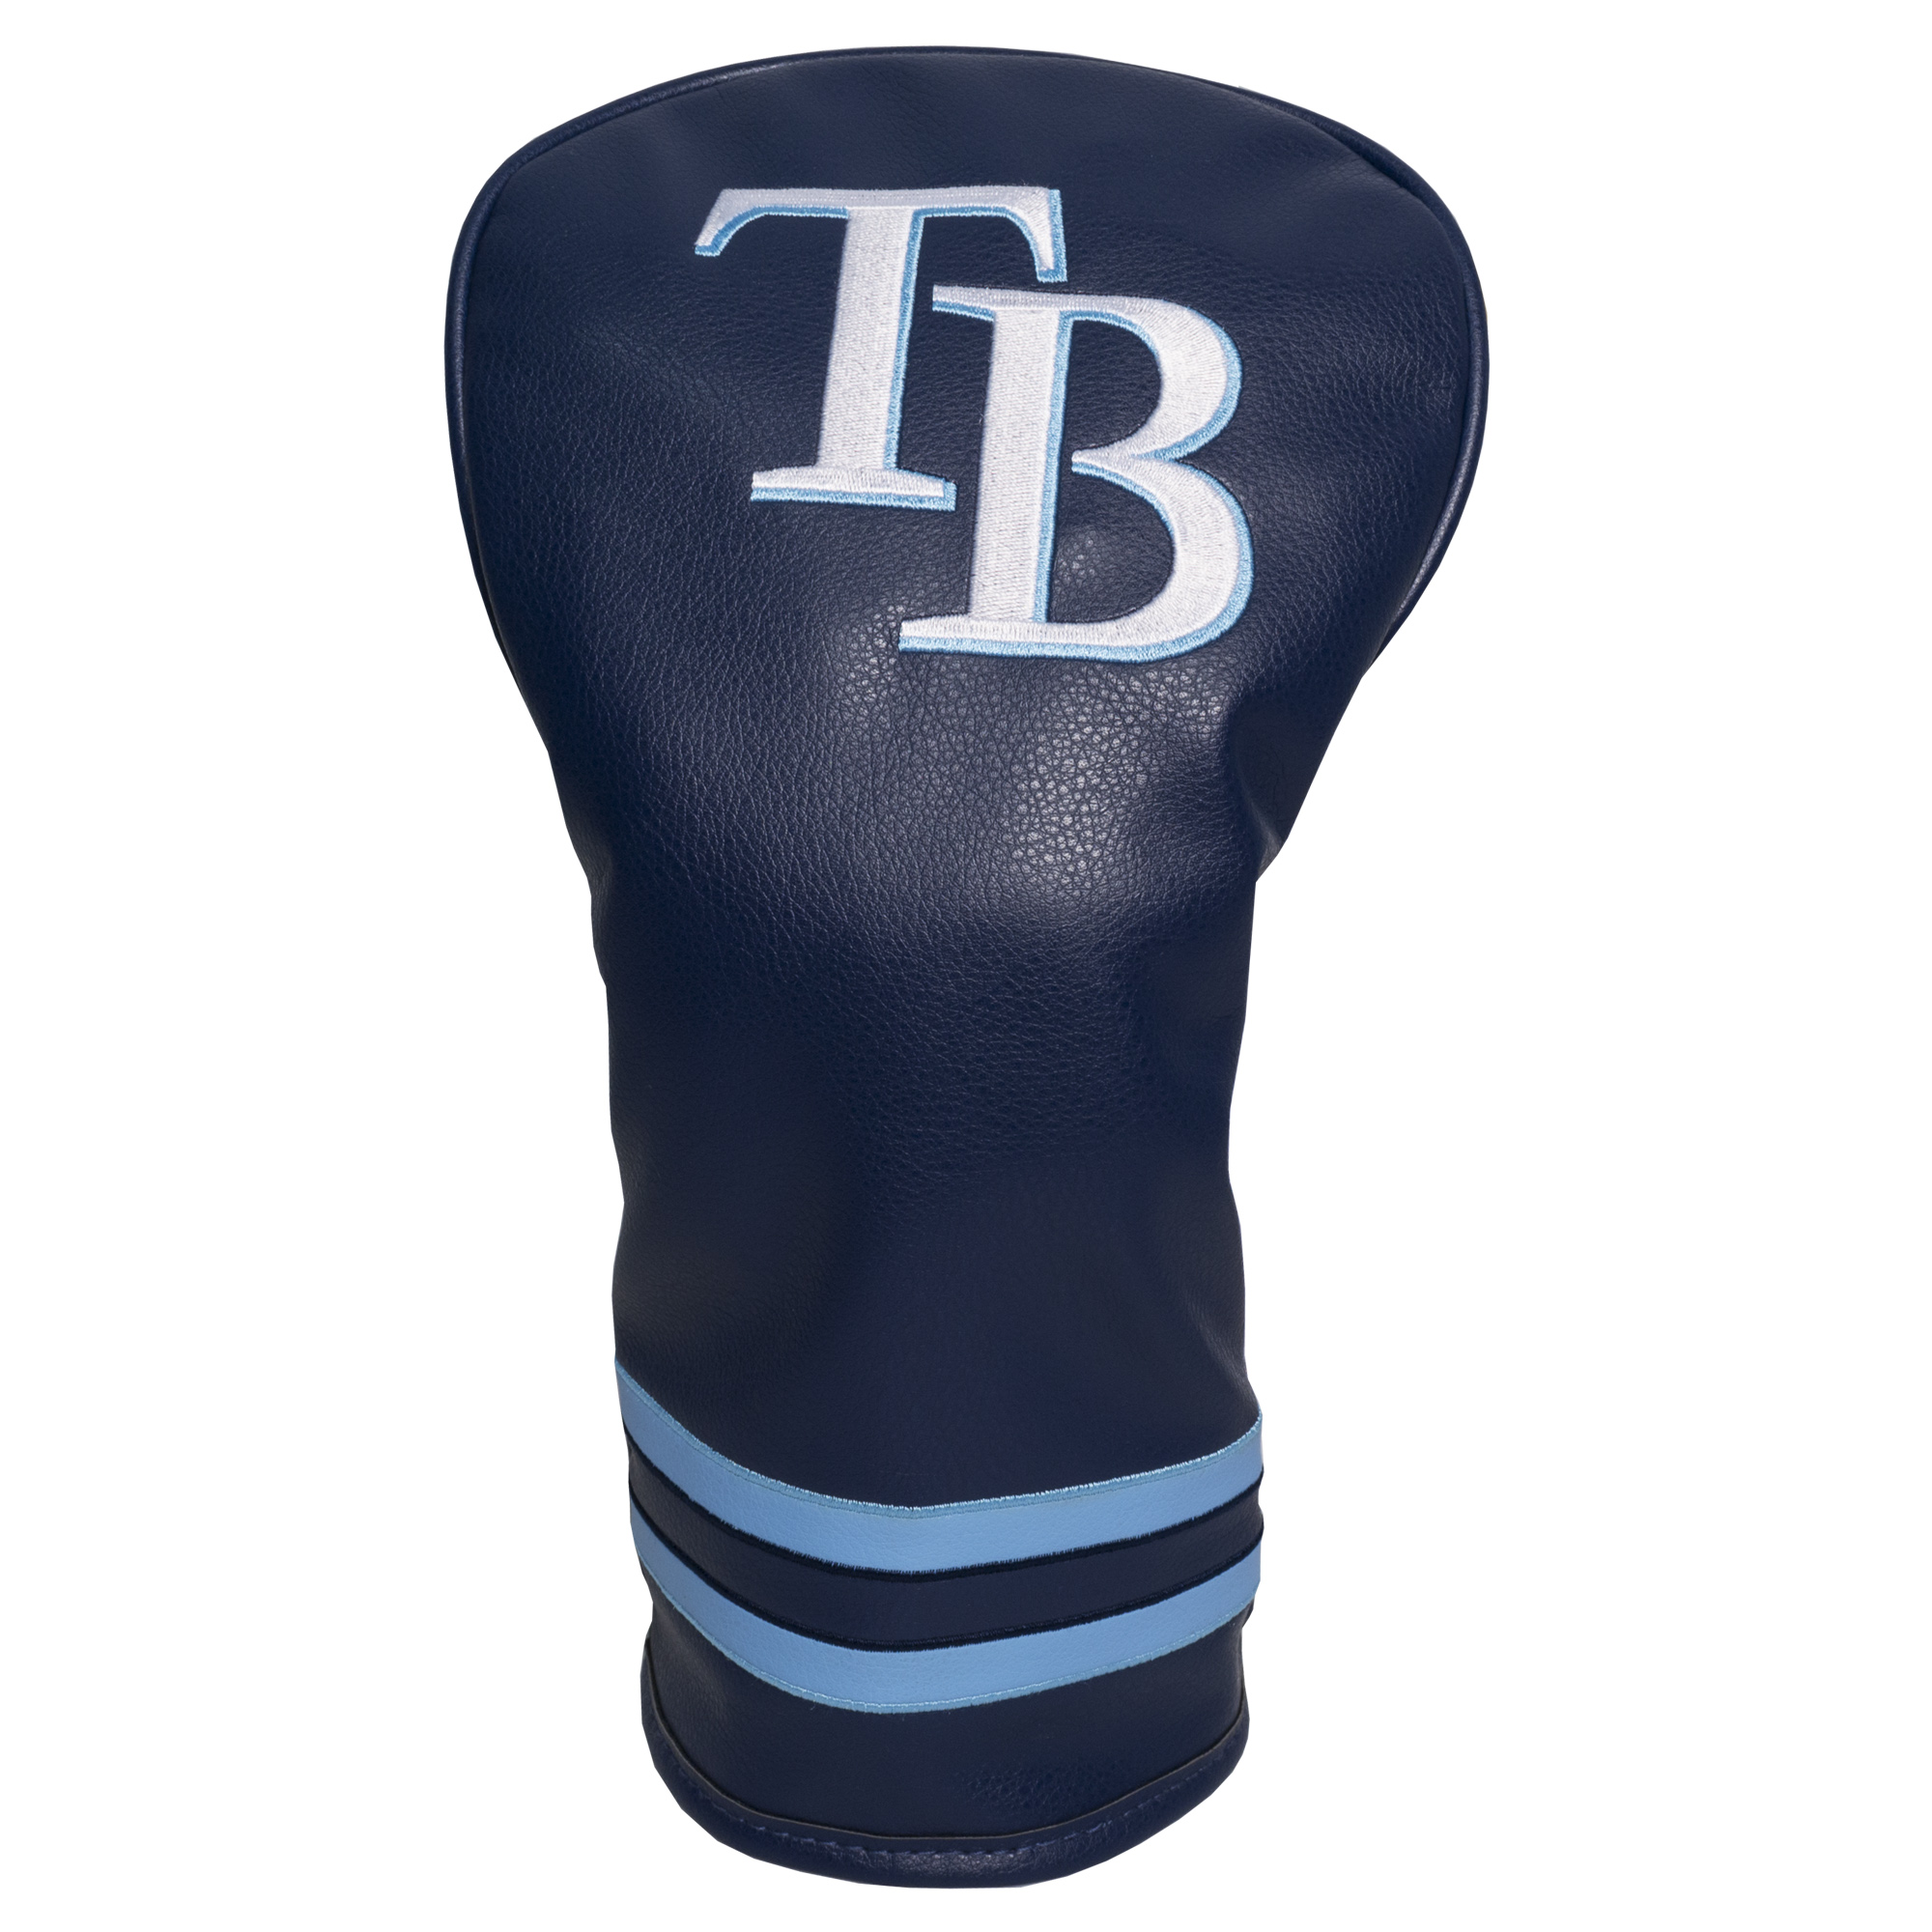 Tampa Bay Rays Vintage Driver Headcover